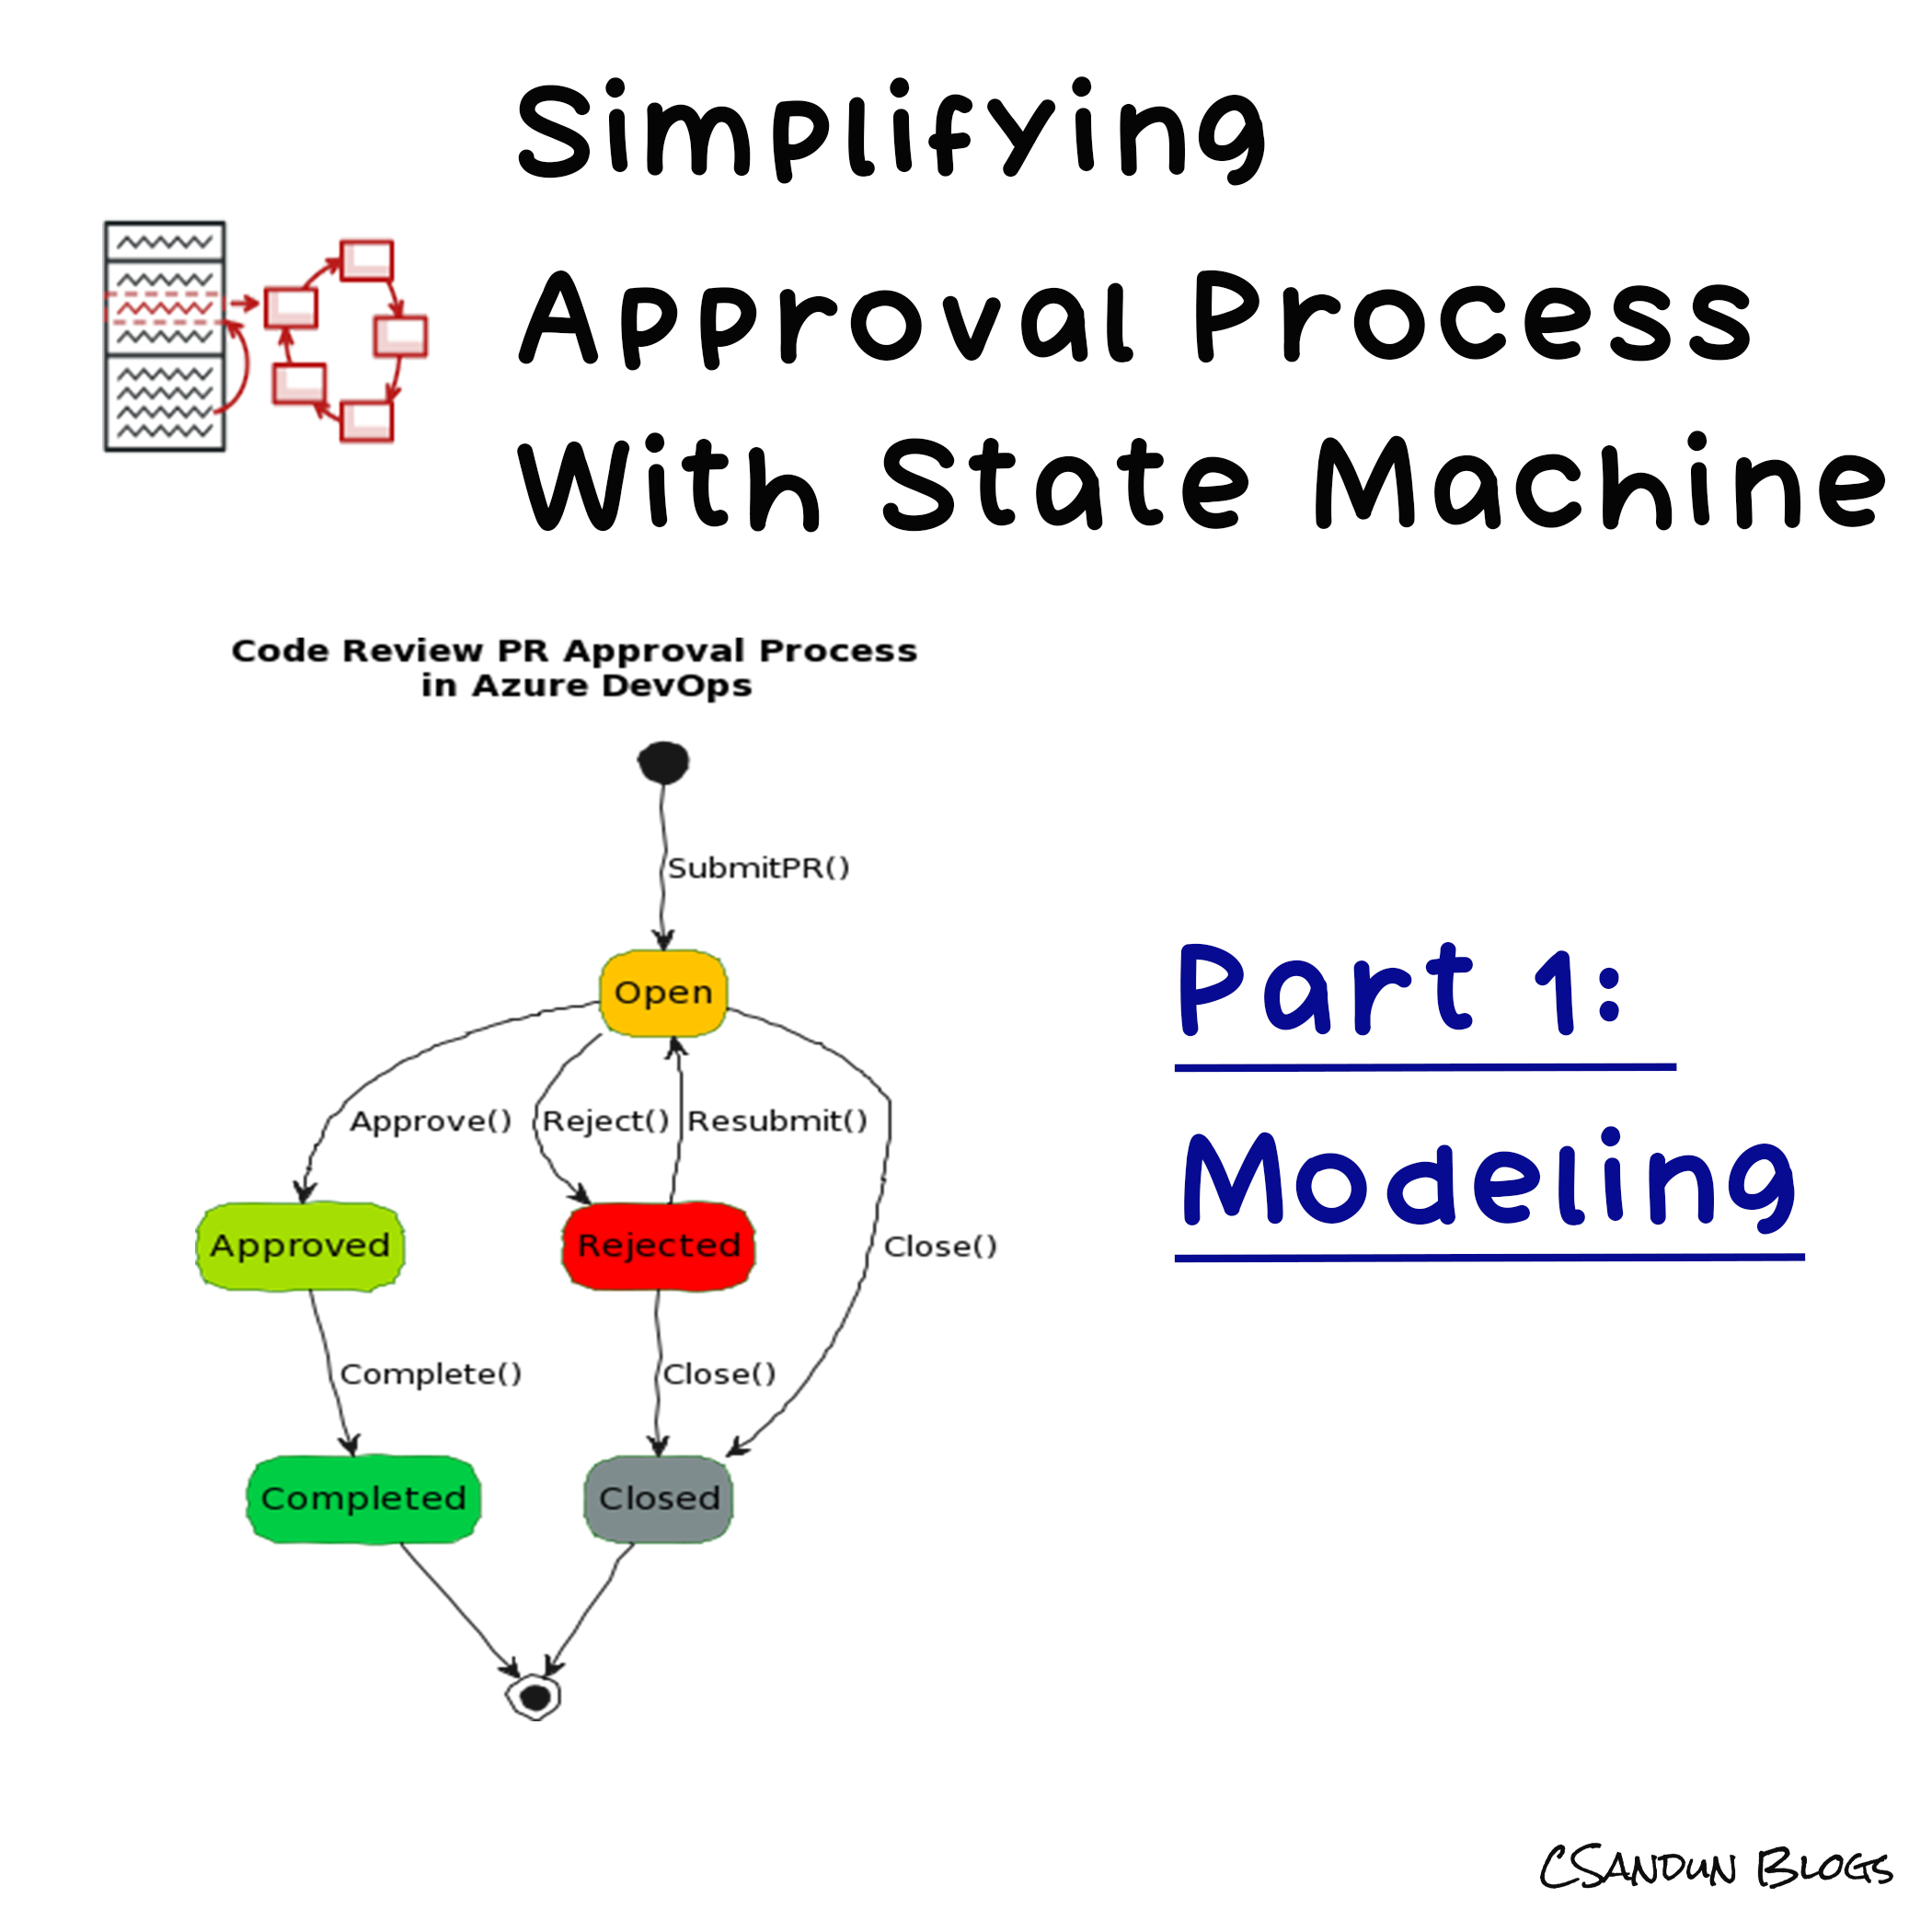 Simplifying Approval Process with State Machine : A Practical Guide (Part 1) - Modeling